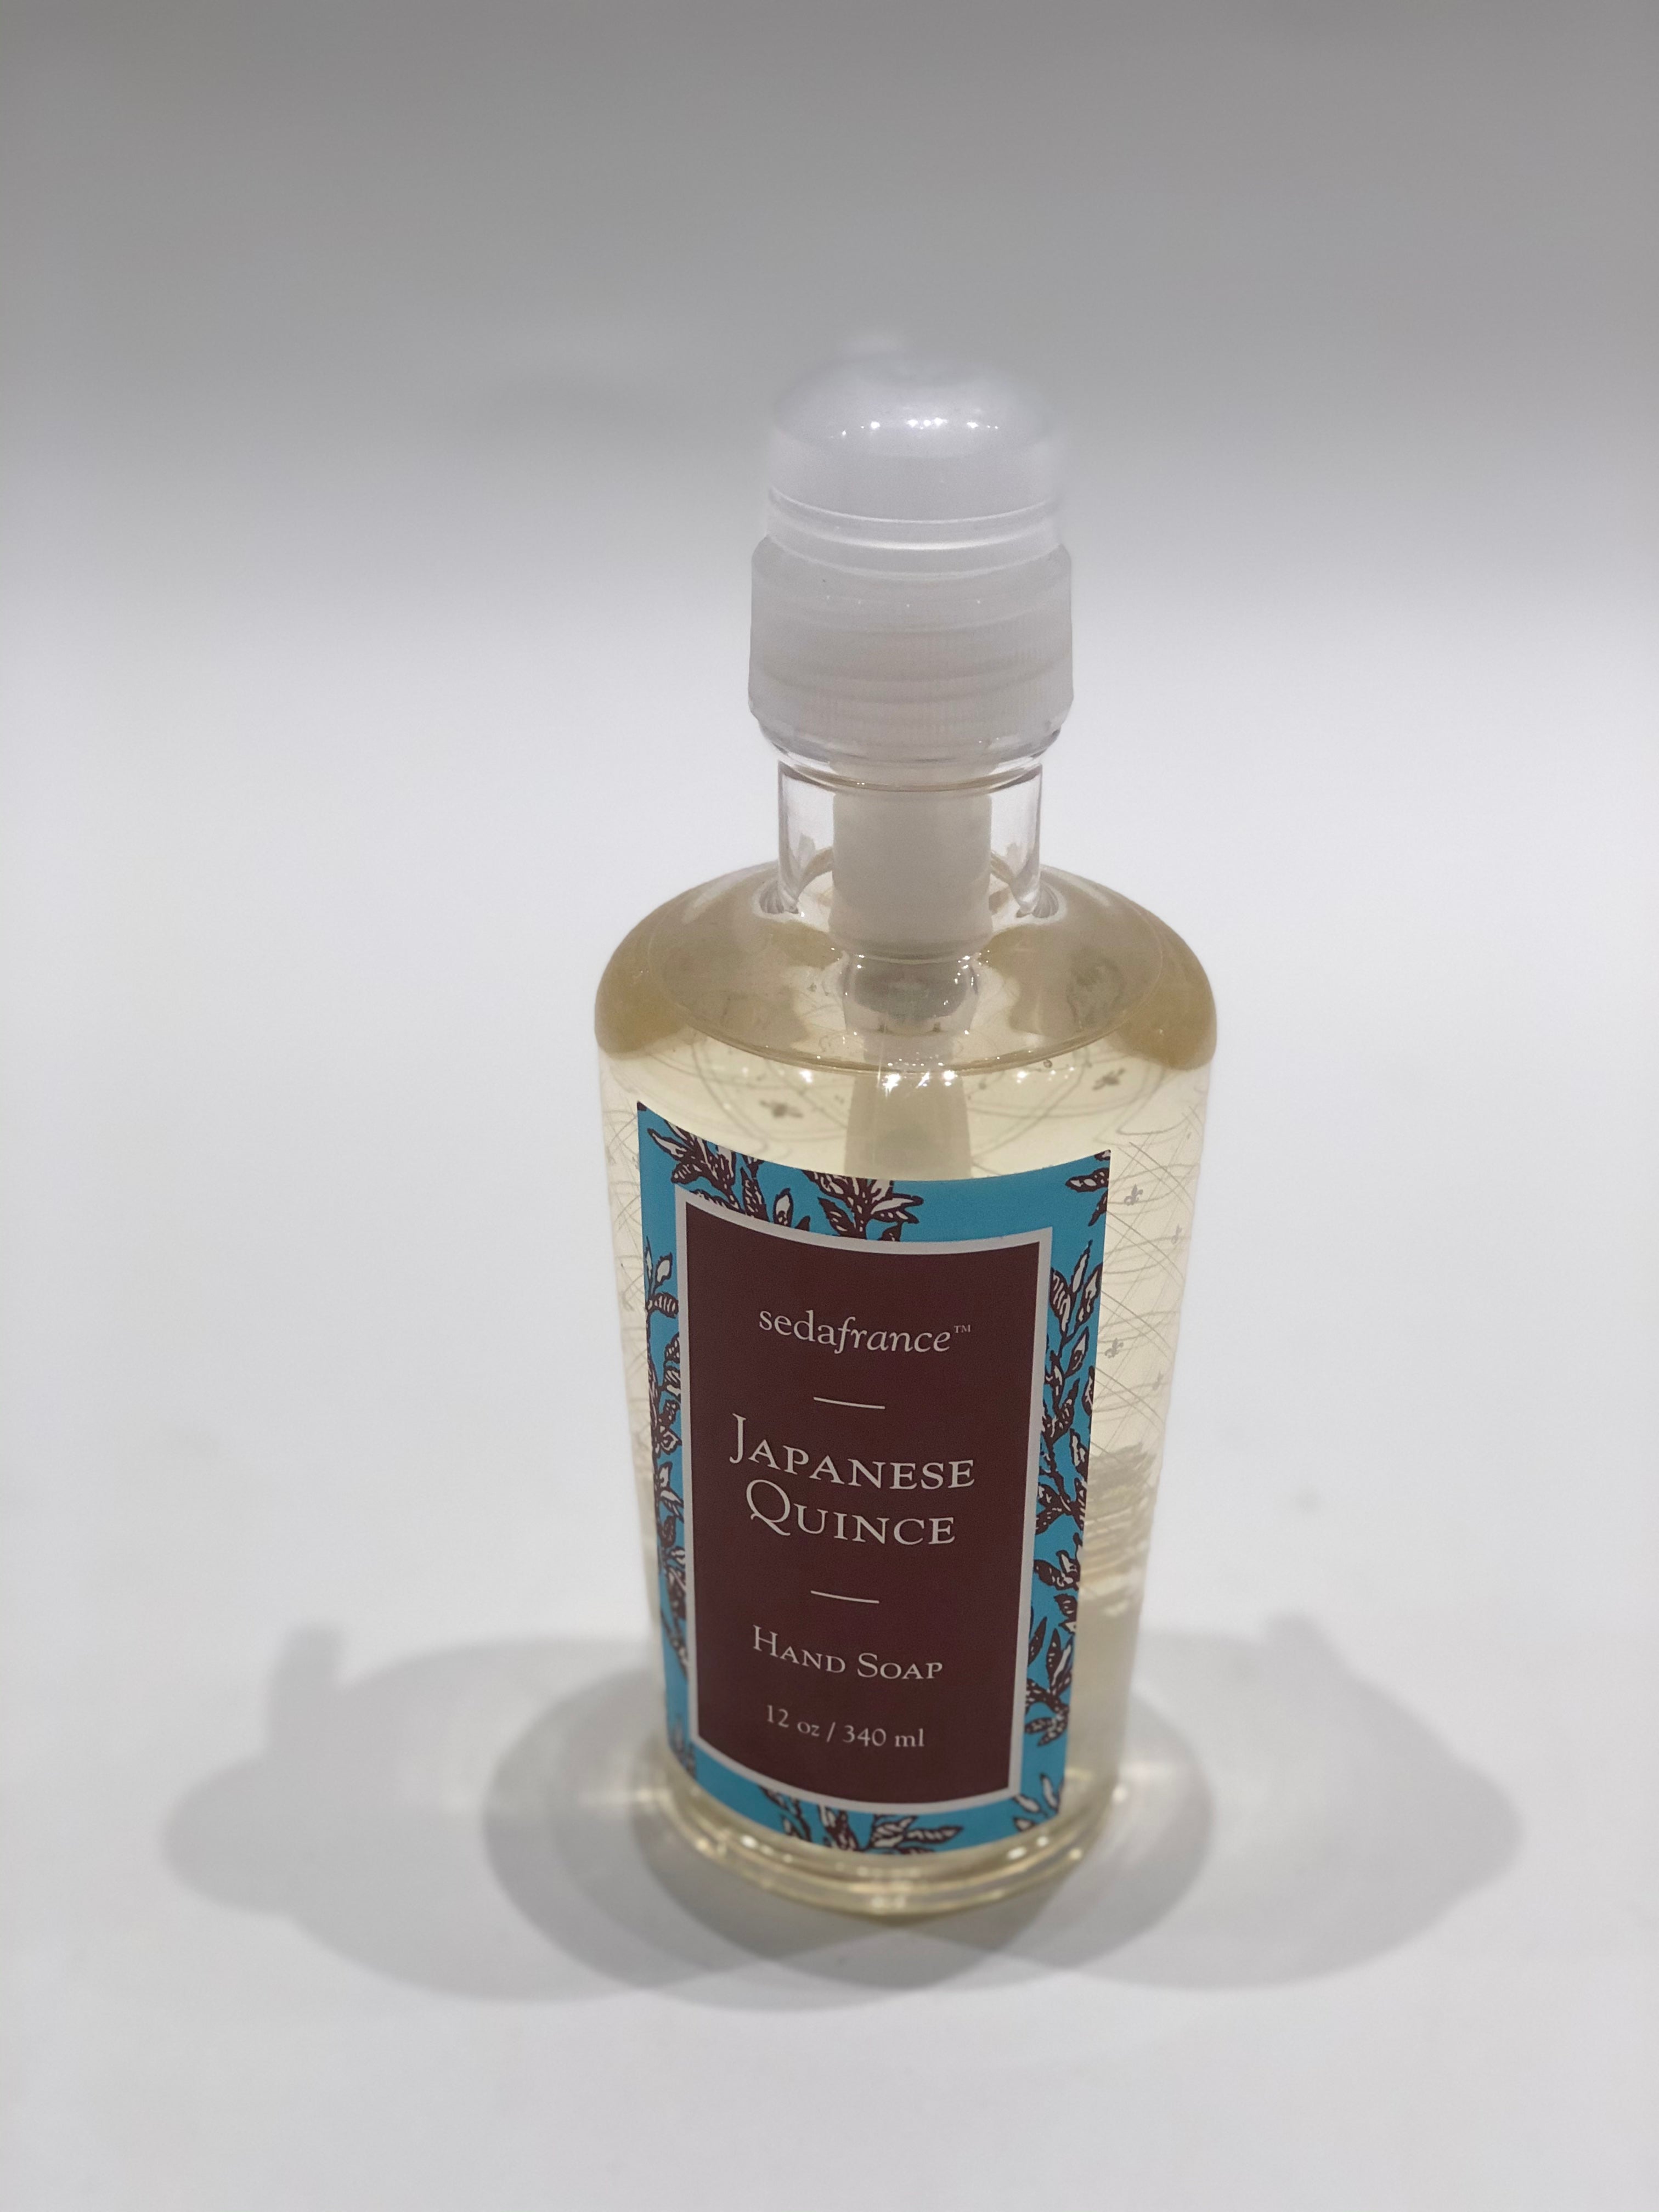 Seda France Hand Soap Japanese Quince